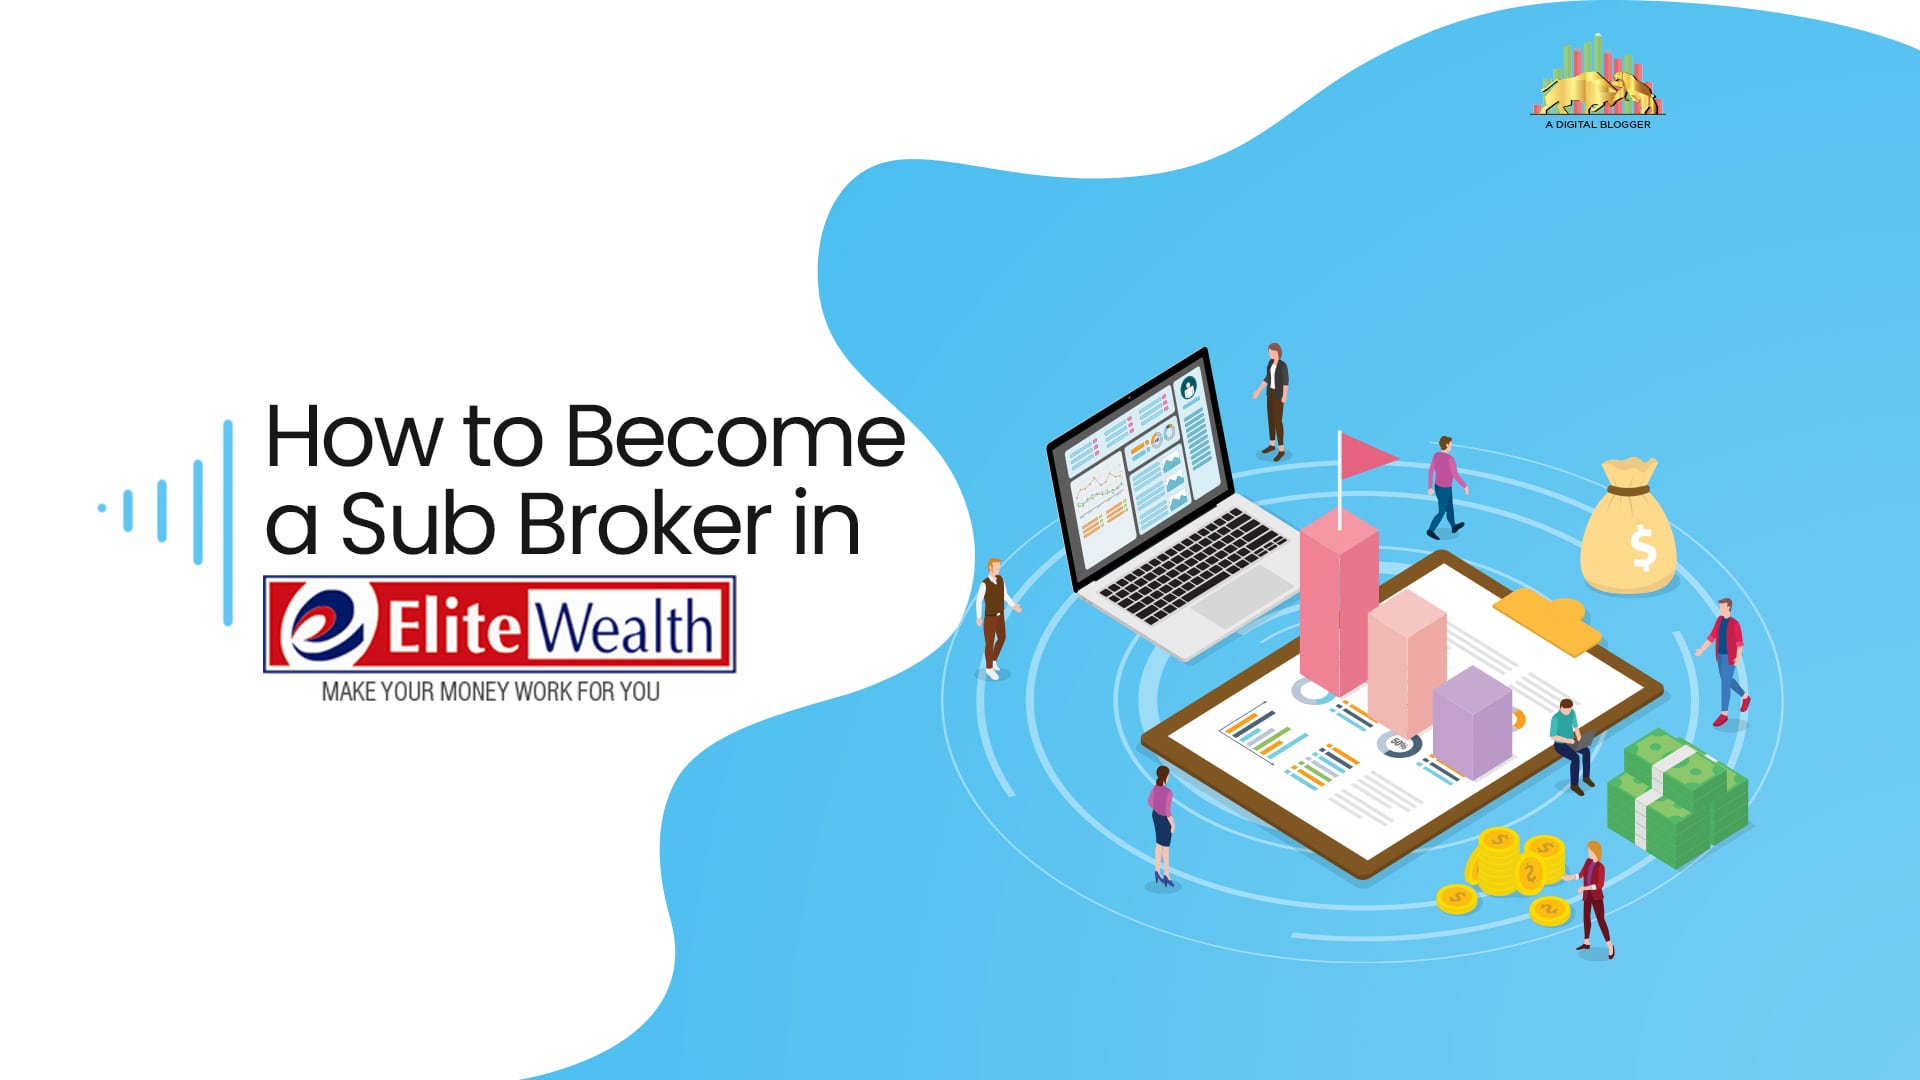 Learn the process To Become a Sub Broker in Elite Wealth